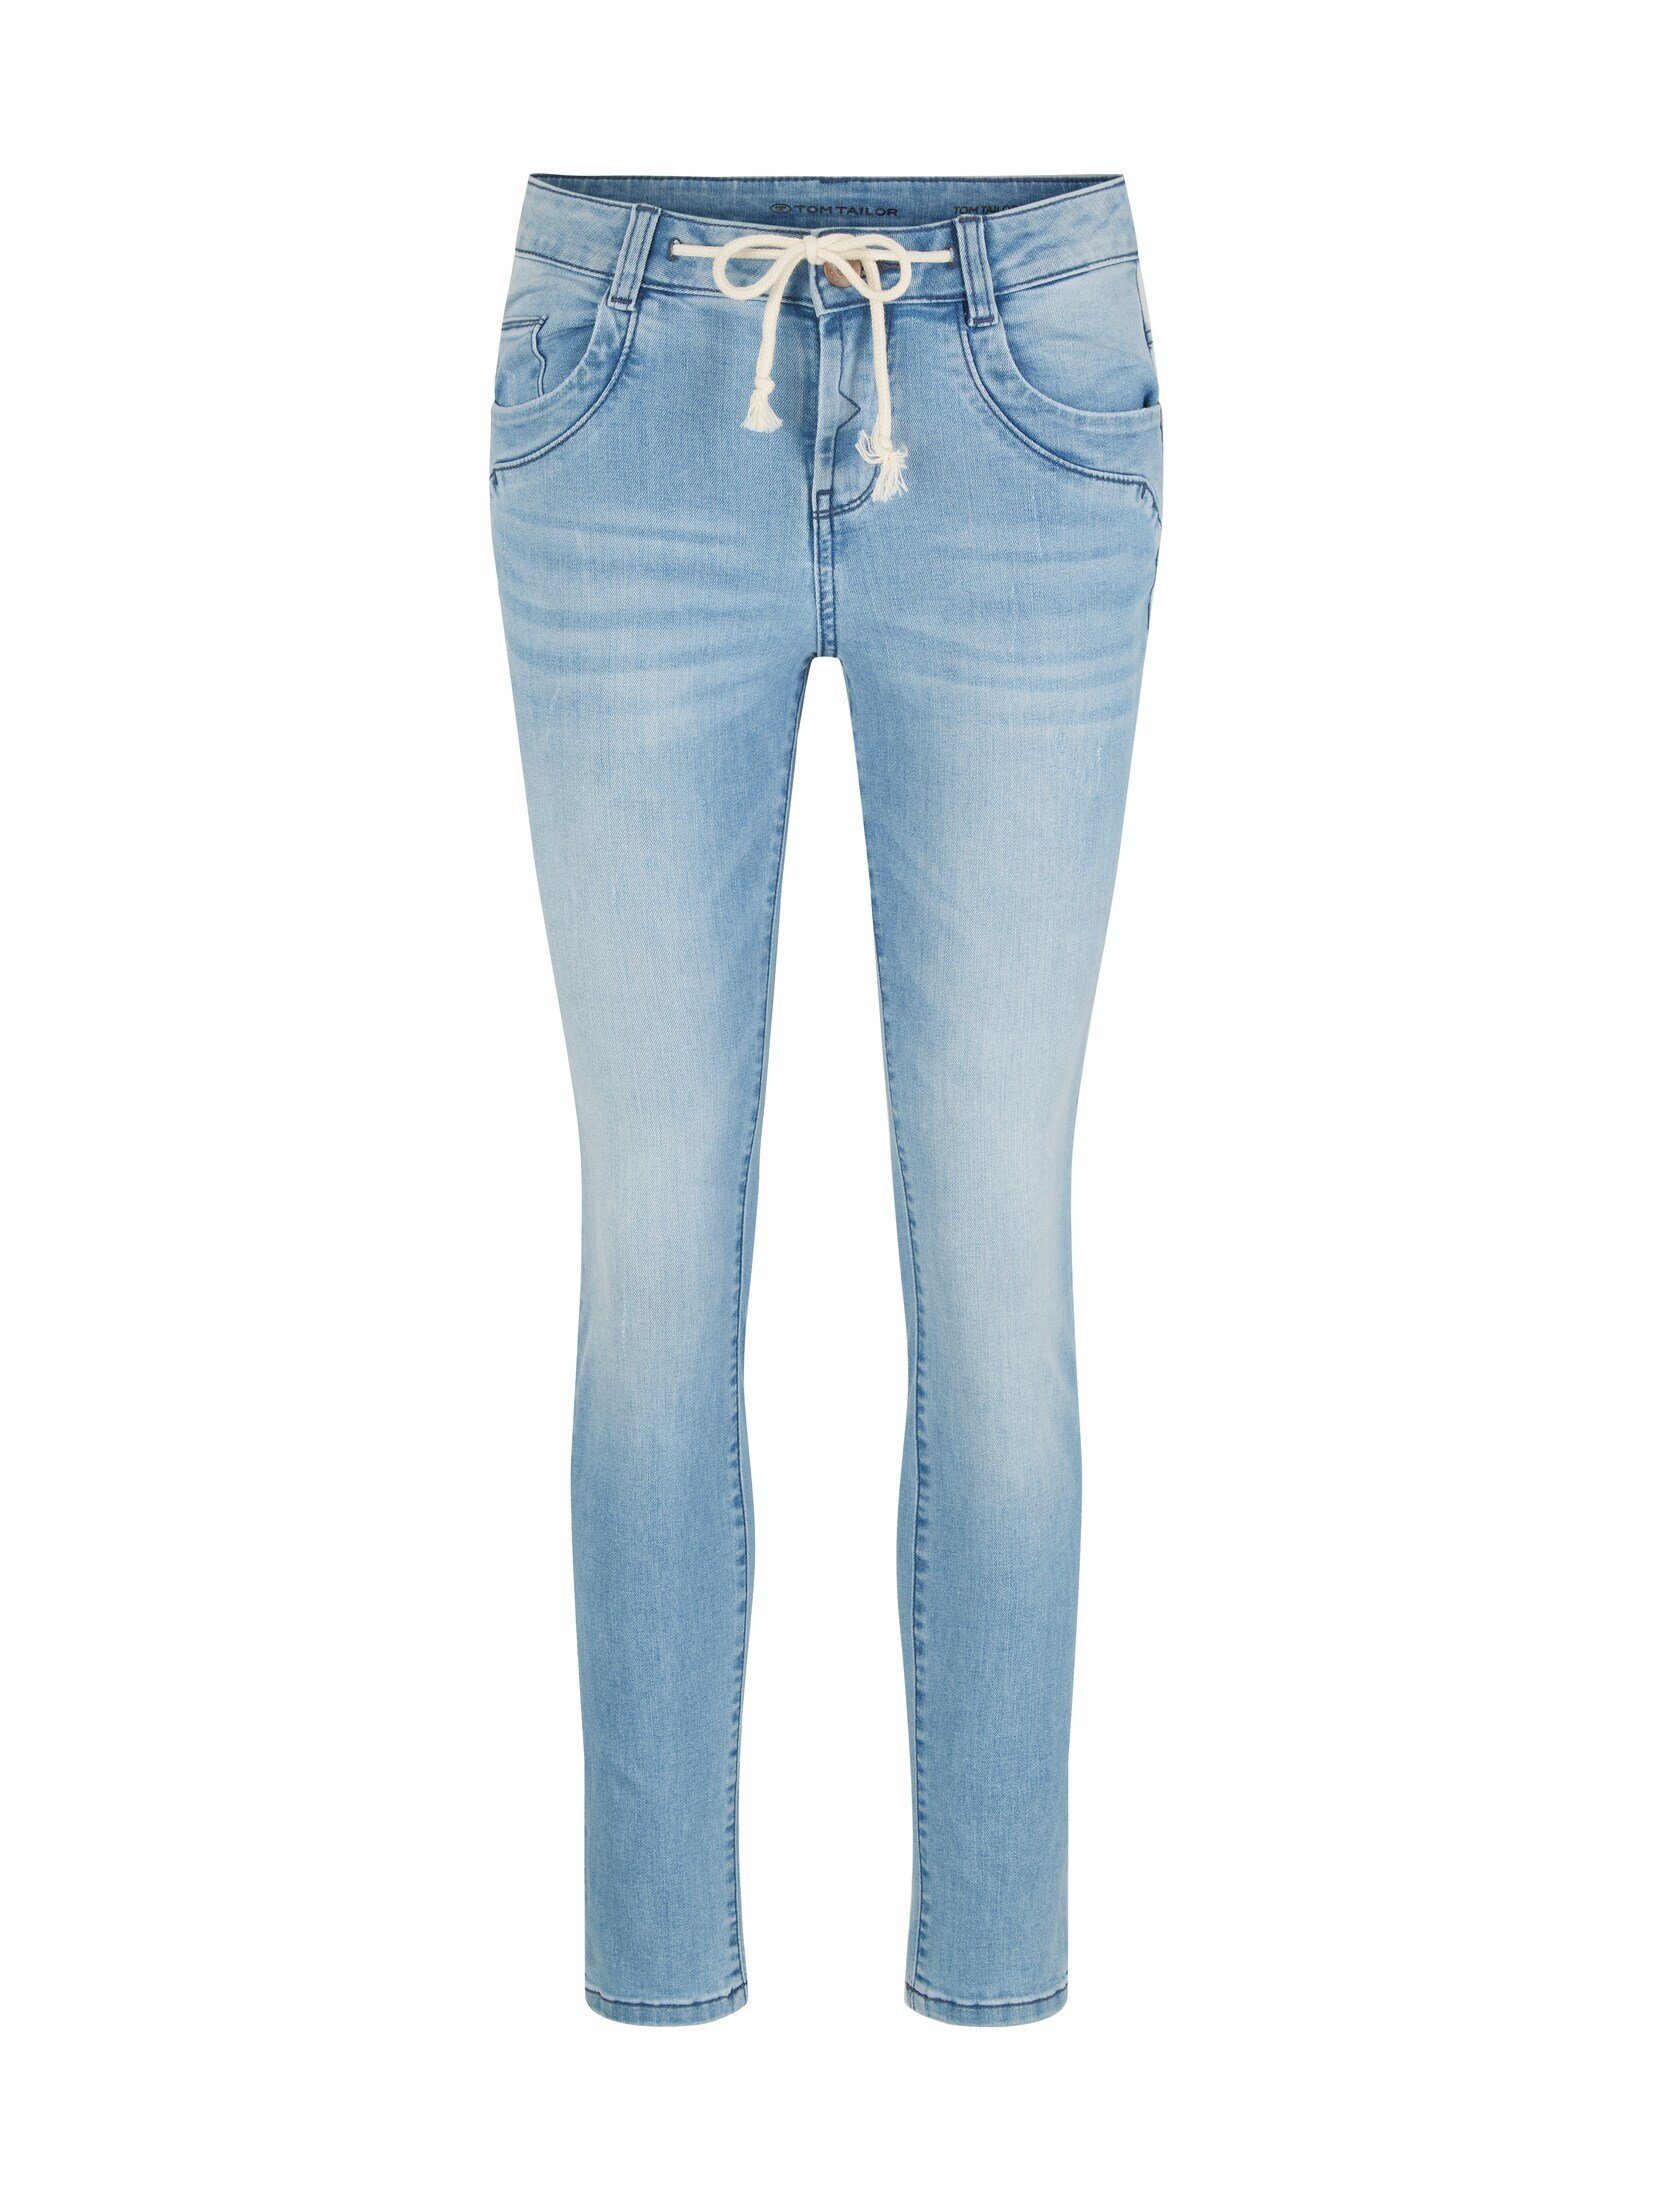 TOM TAILOR Skinny-fit-Jeans Tapered Relaxed Denim Stone Blue Jeans Light